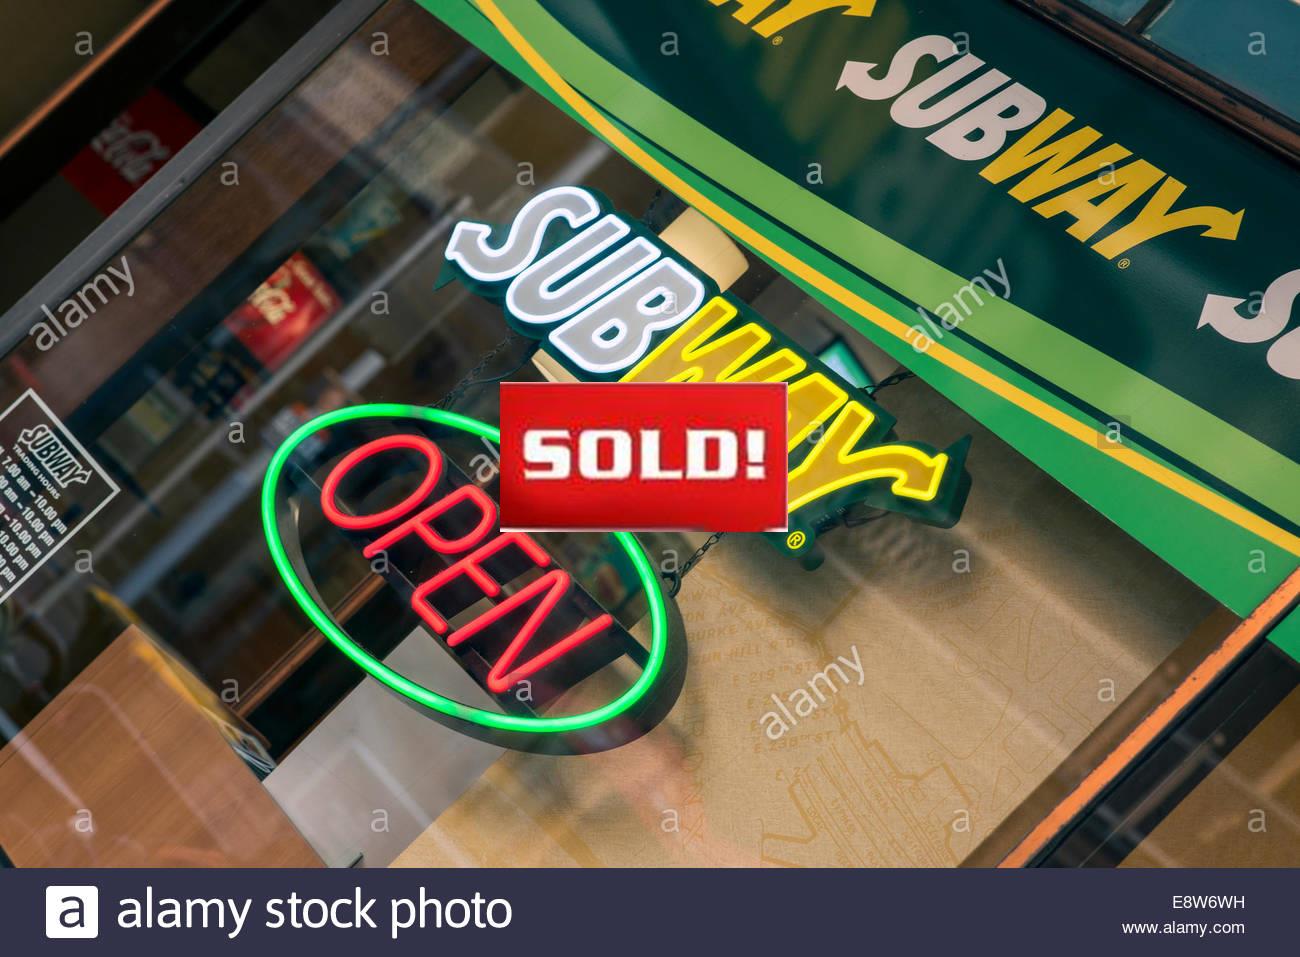 WANTED SUBWAY BUSINESS for SALE – Bendigo o...Business For Sale